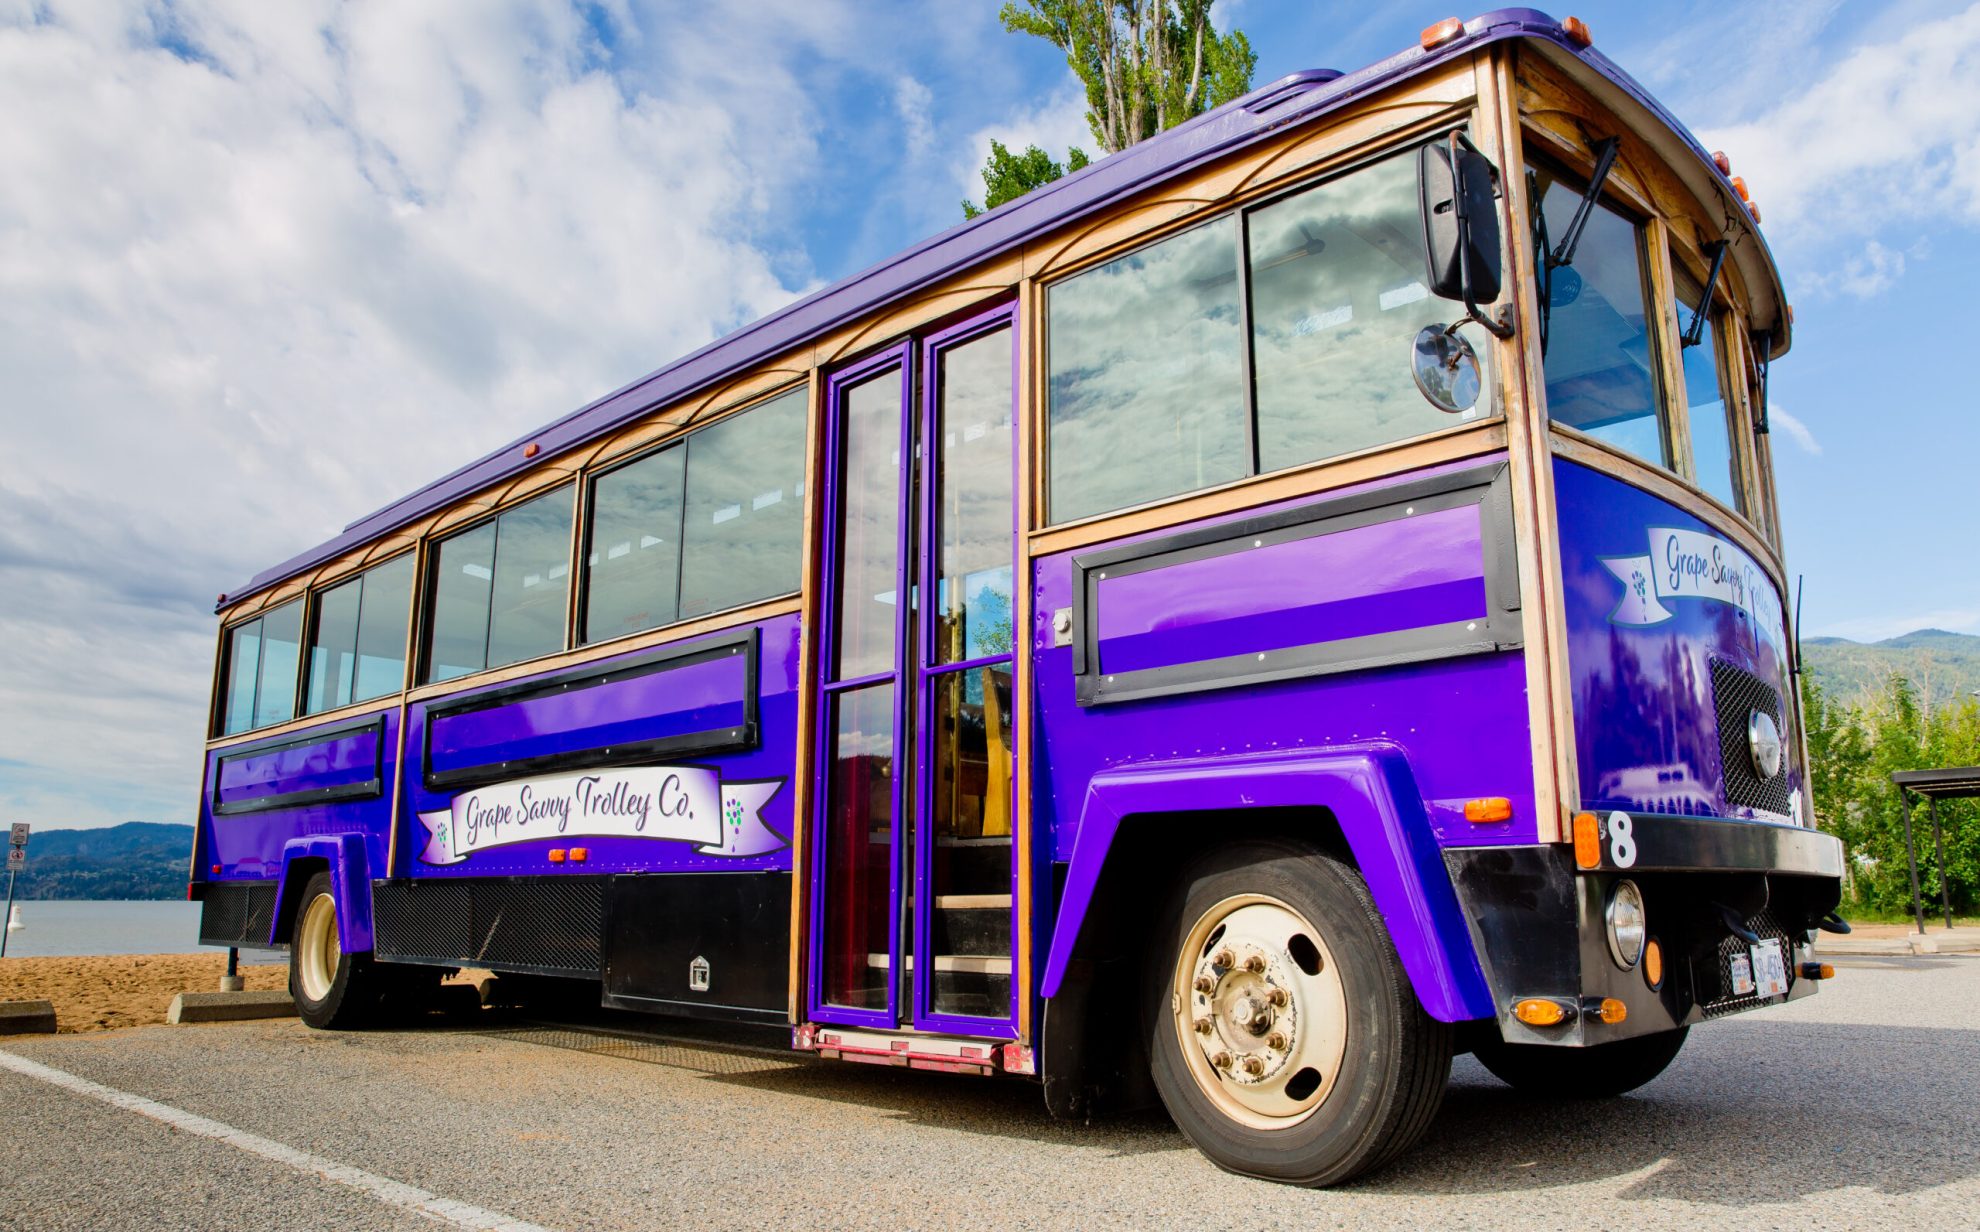 Grape Savvy Trolley Tours bus parked near the beach in Penticton